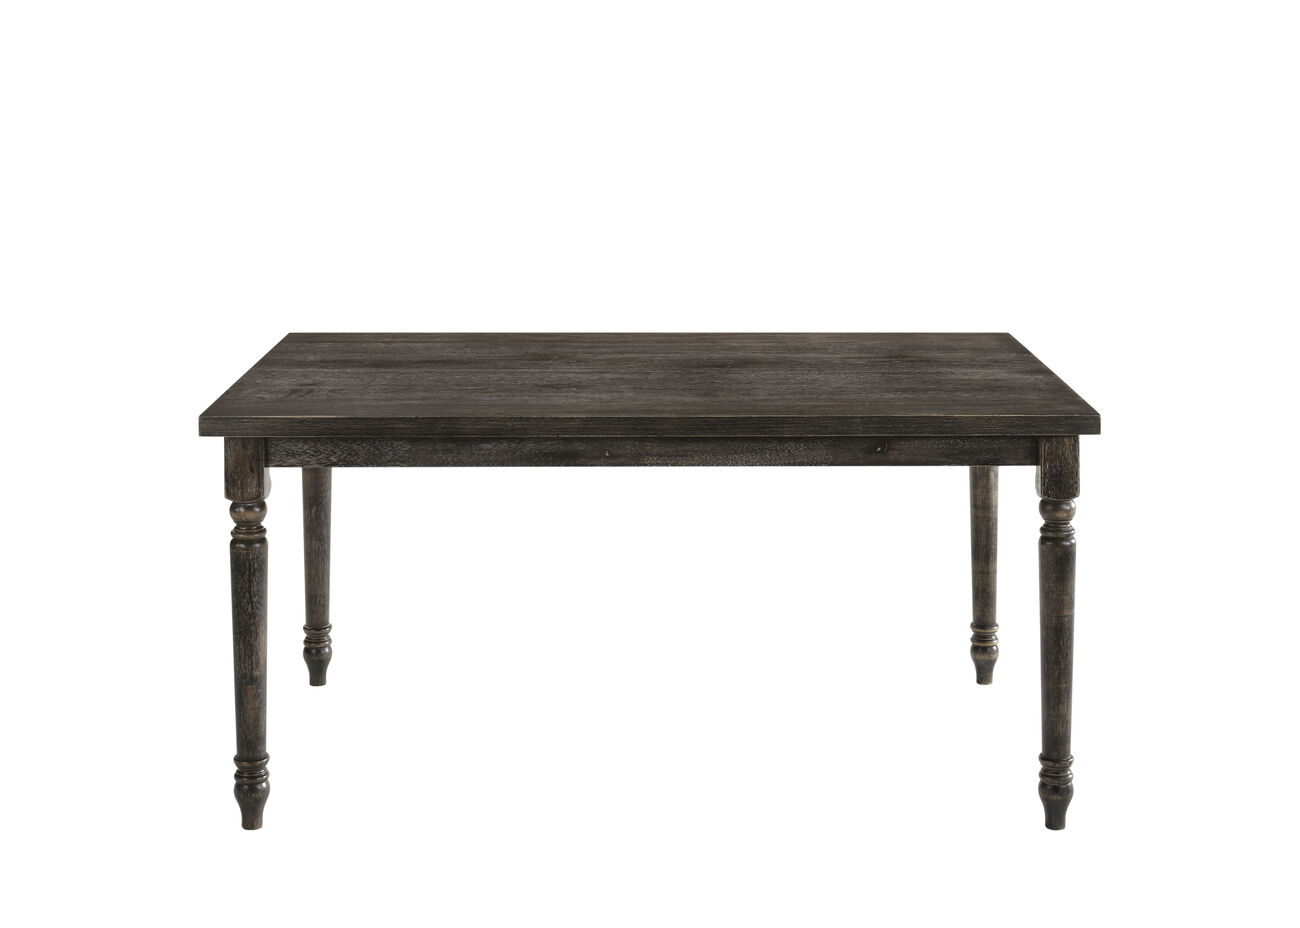 Rustic Style Wooden Dining Table with Rectangular Top and Turned Legs, Gray